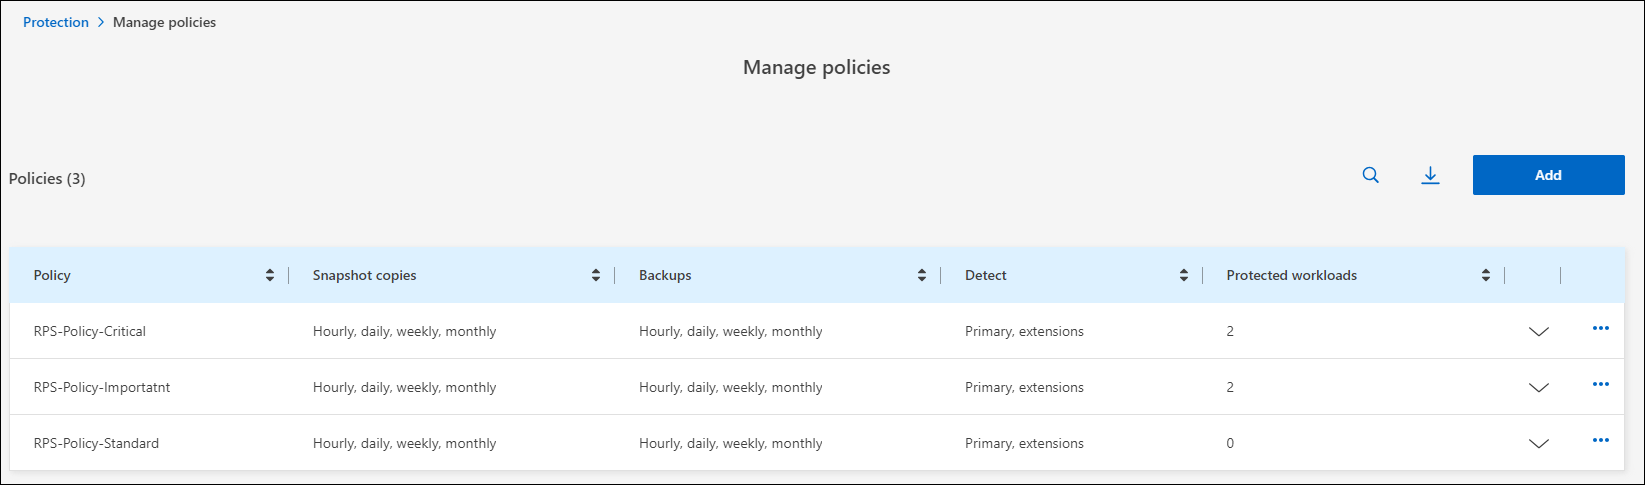 "[Manage policies